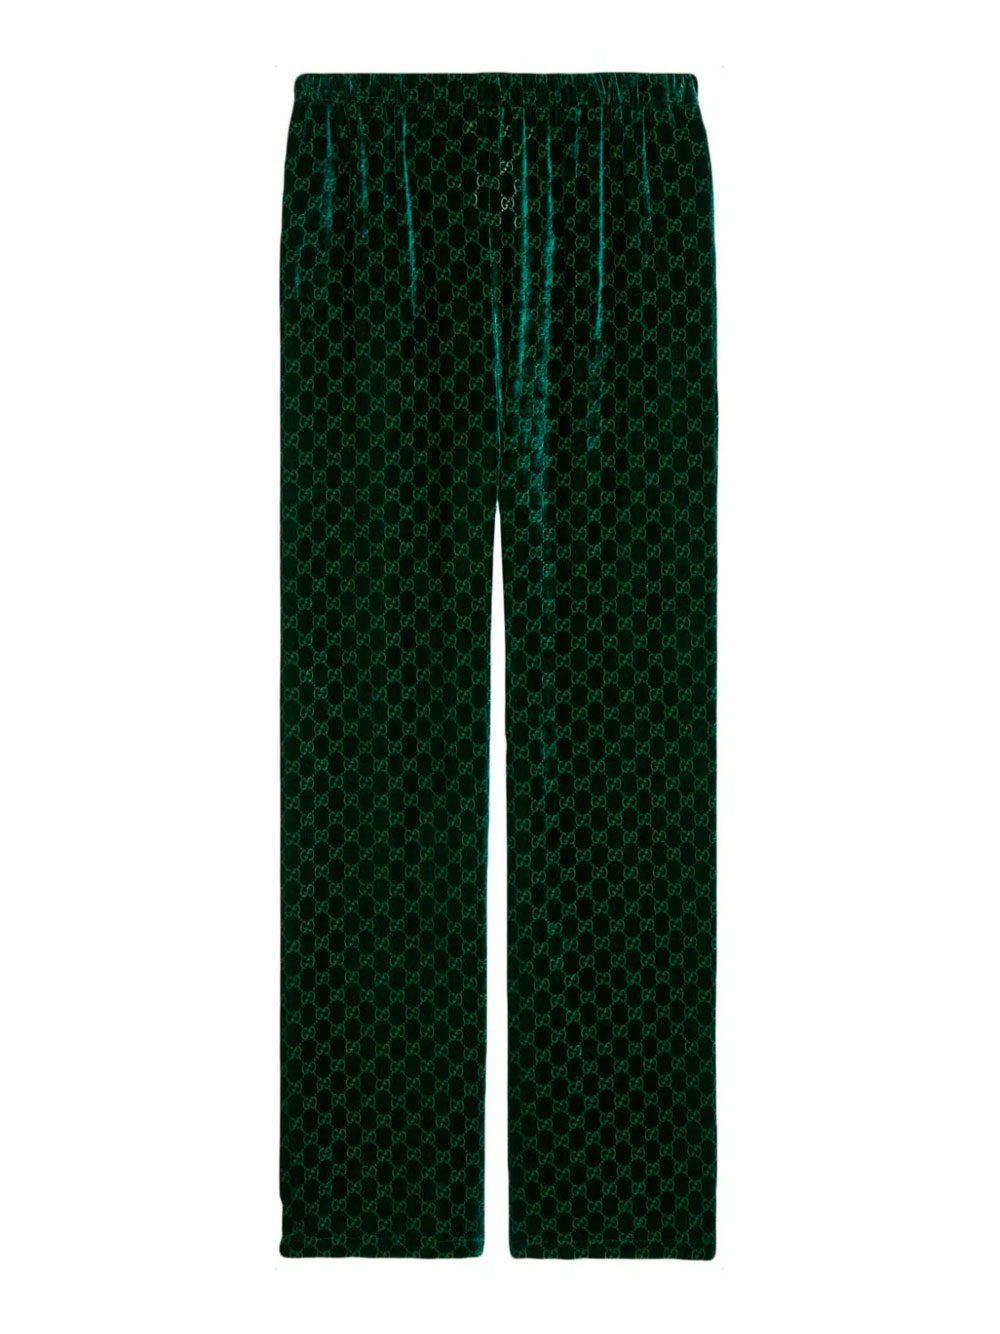 Gucci men's Checkered straight leg pants - buy for 522400 KZT in the  official Viled online store, art. 672087 ZAILW.1136_50_222